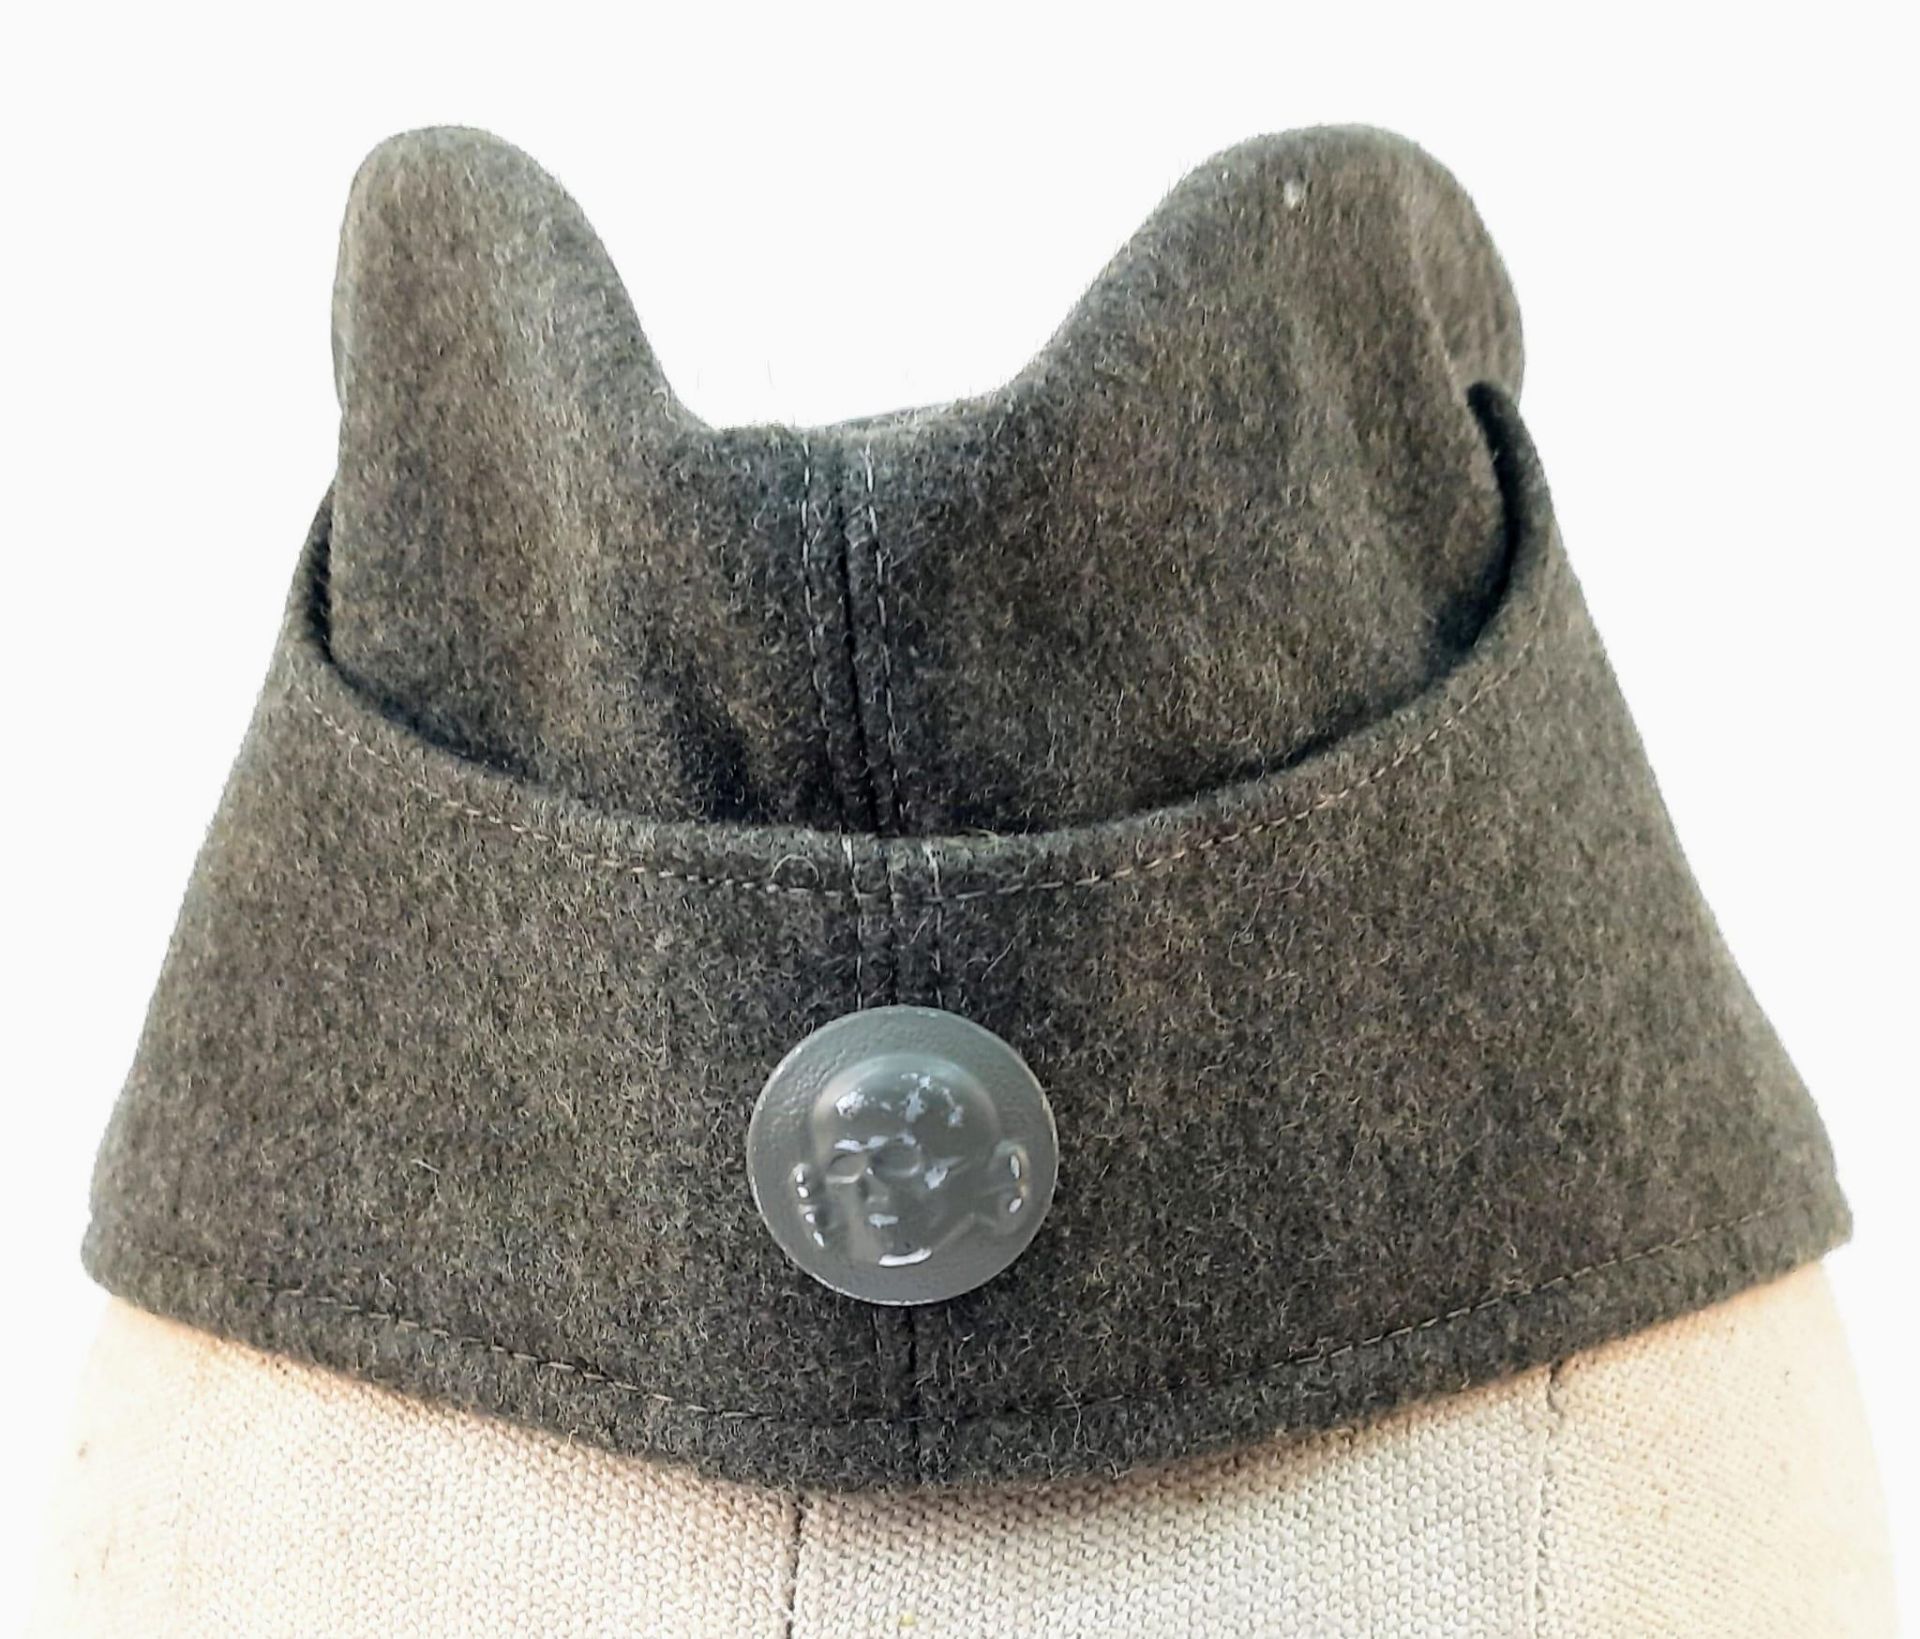 3rd Reich SSVT Side Cap Dated 1938. Amazing condition, considering it has been in a drawer for